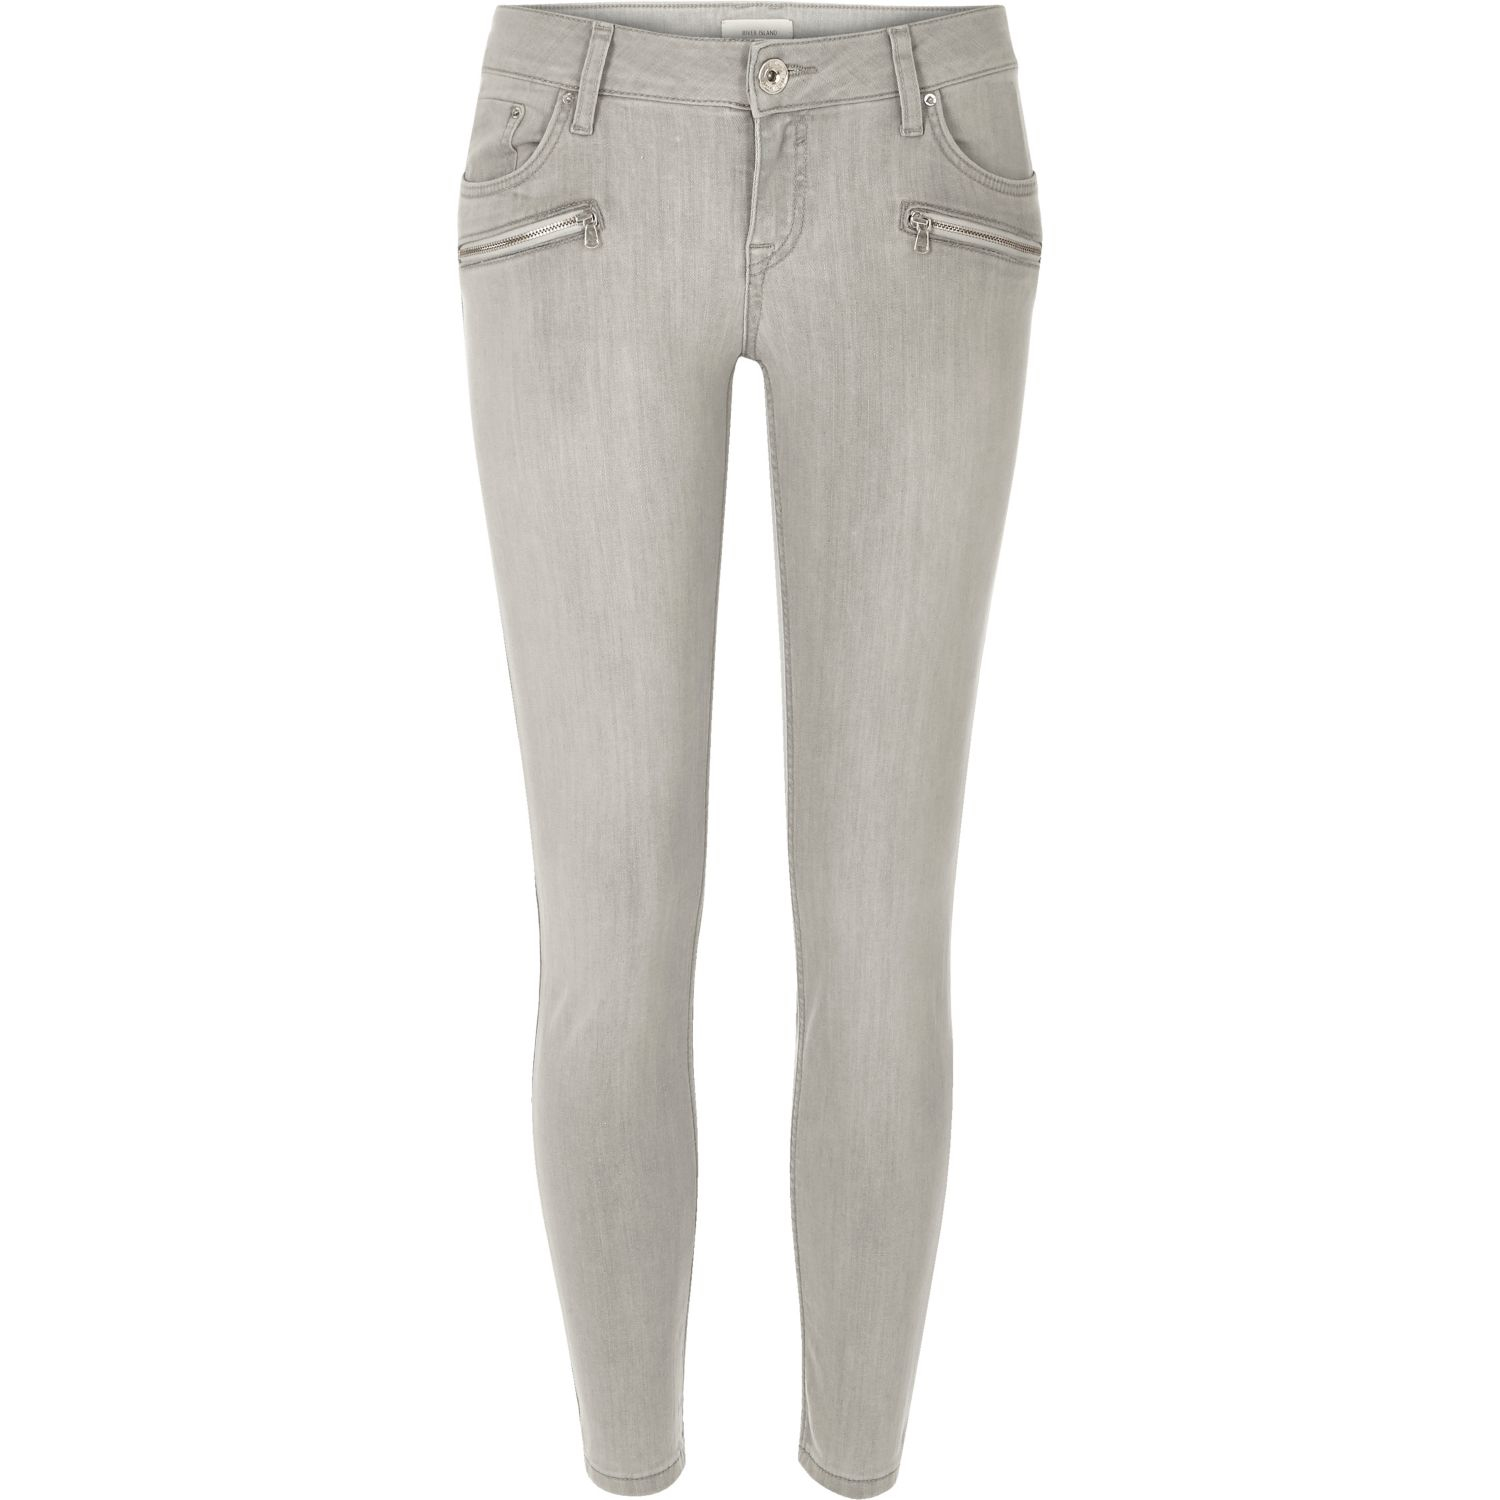 Lyst - River Island Light Grey Low Rise Amelie Superskinny Jeans in Gray